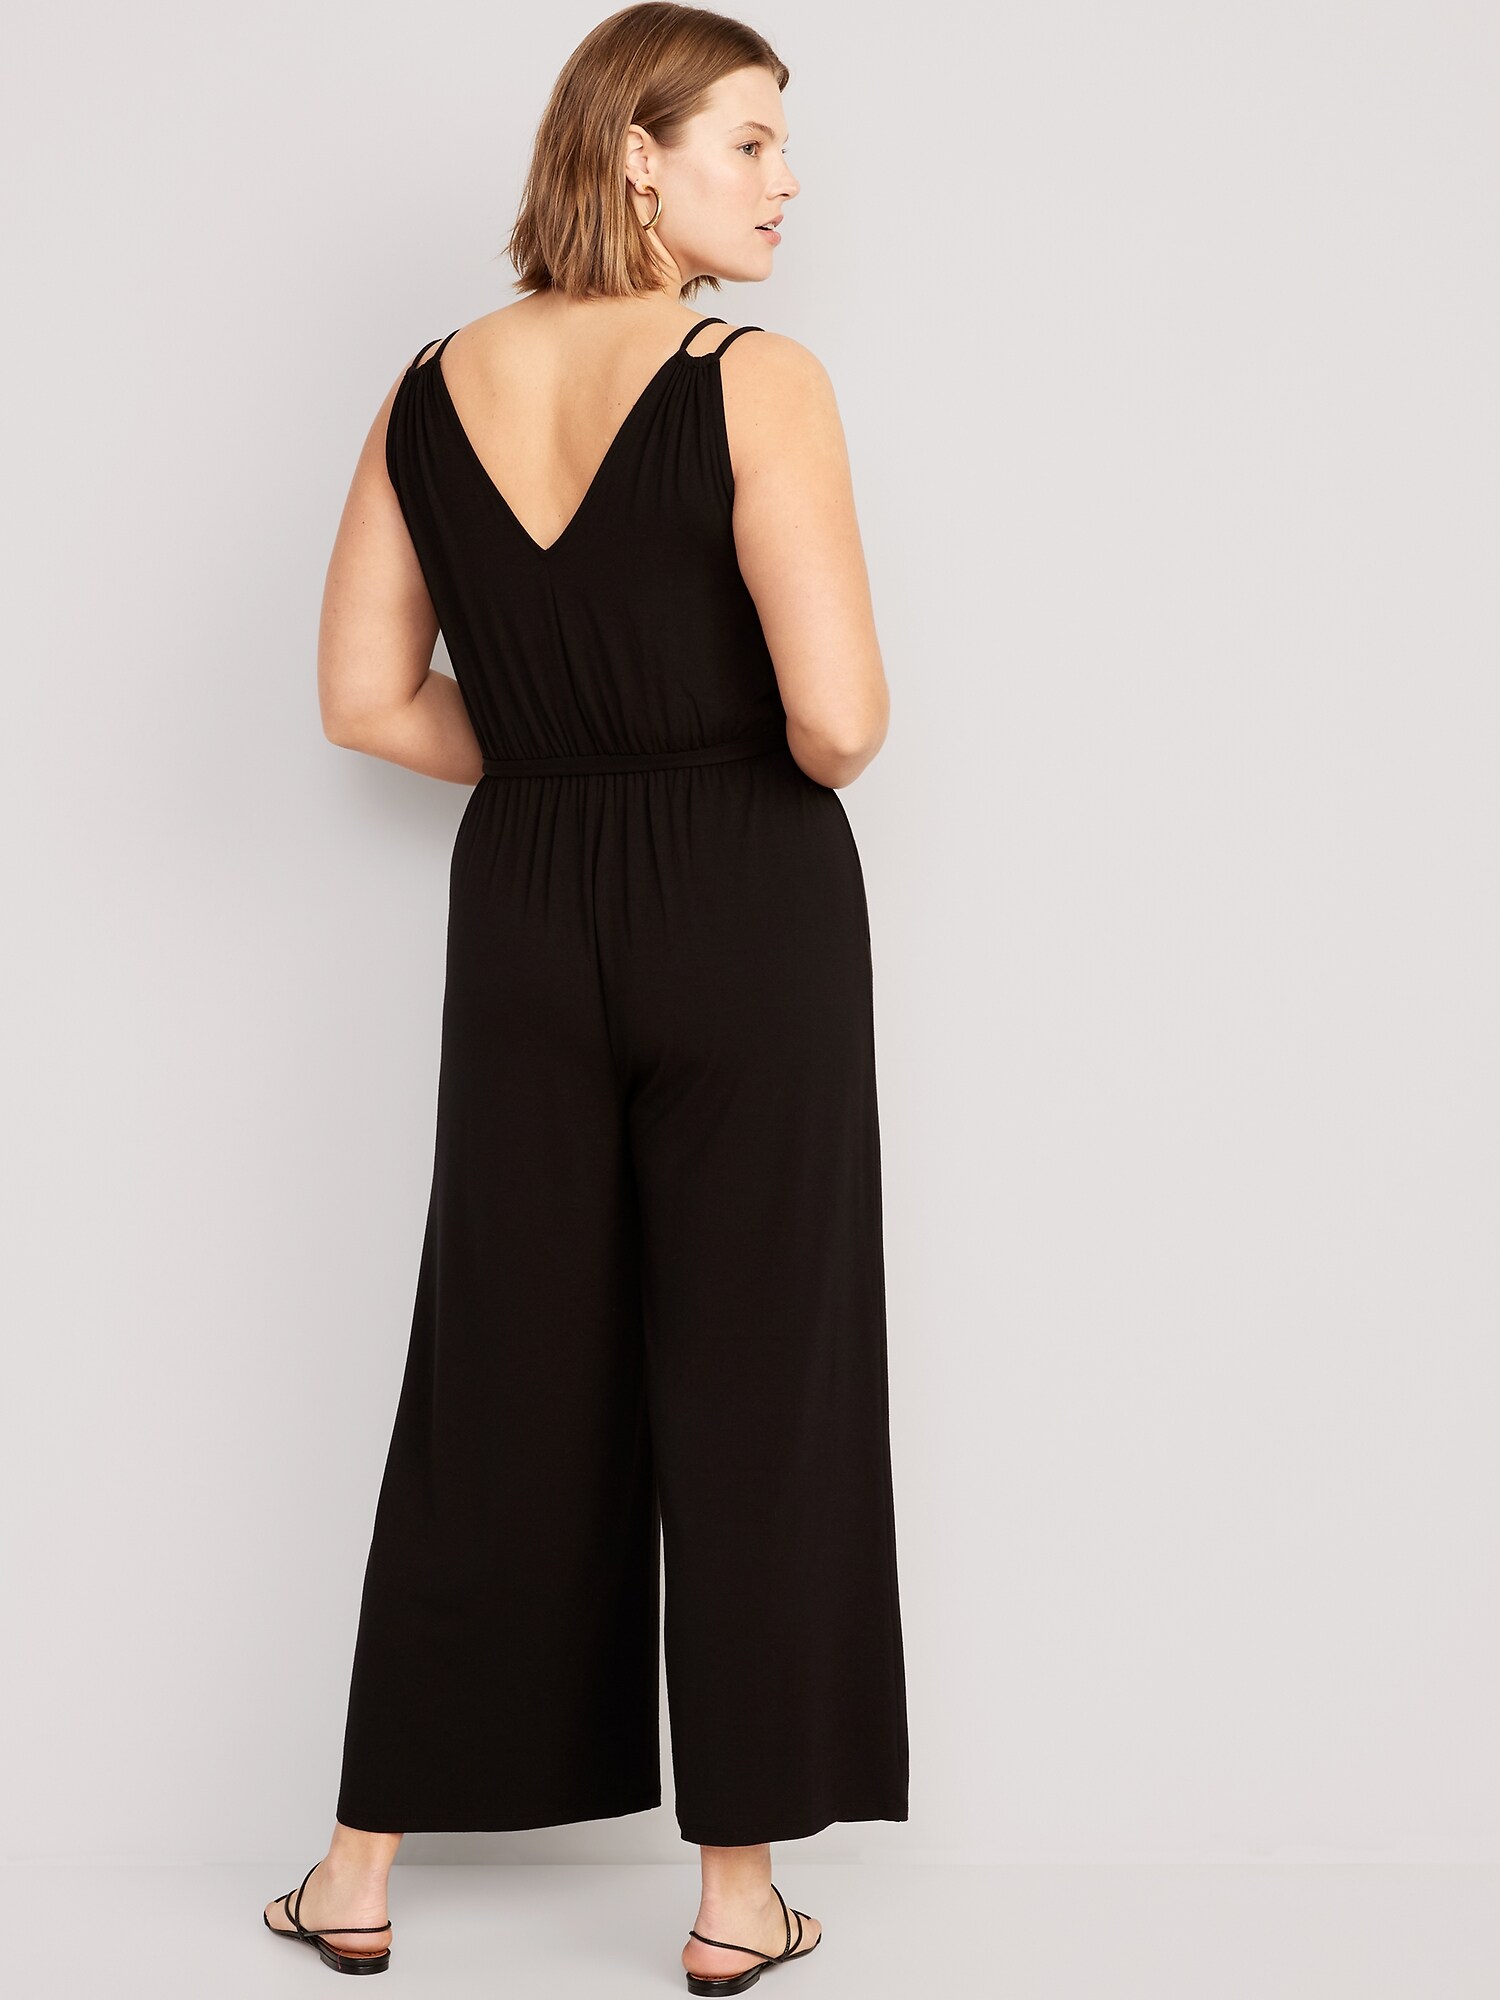 Sleeveless Double-Strap Ankle-Length Jumpsuit for Women | Old Navy